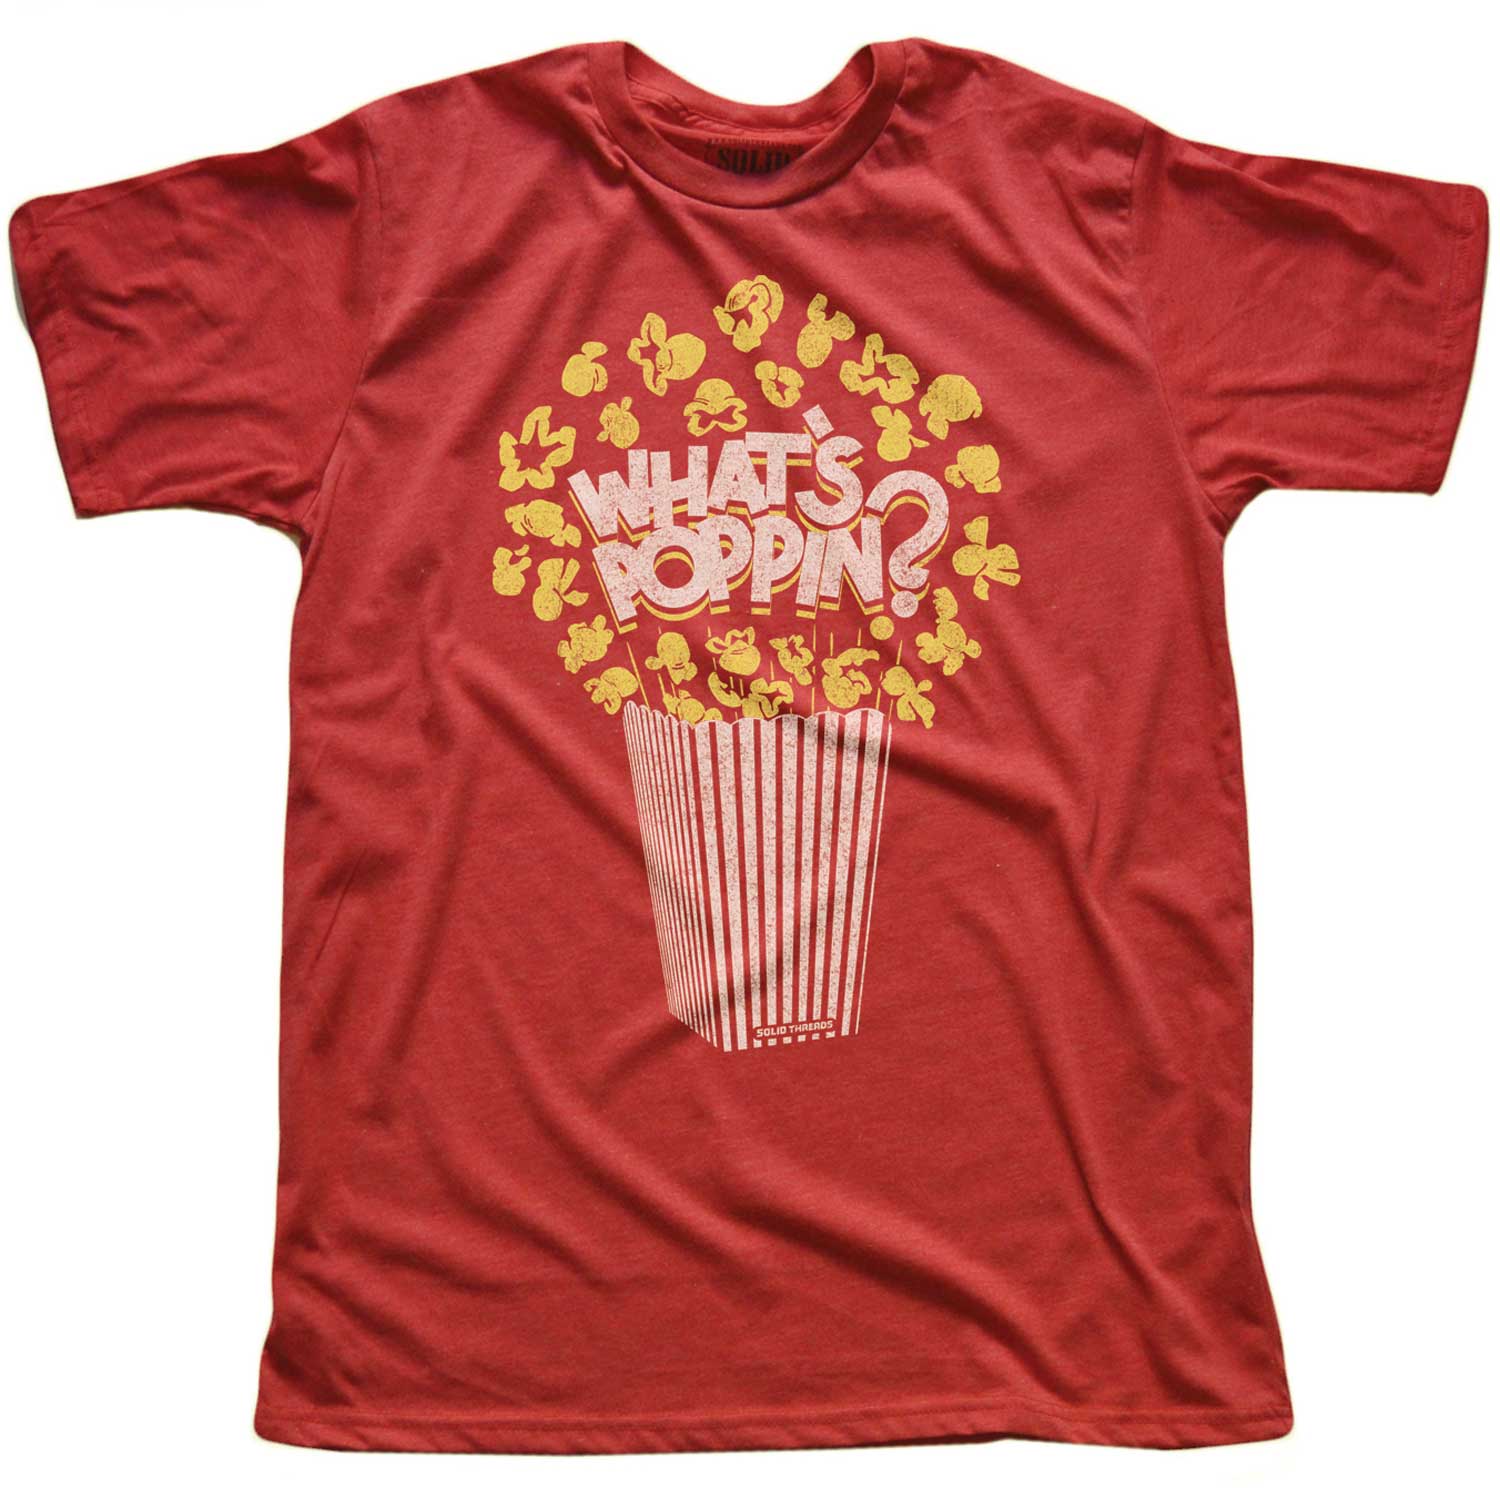 Men's What's Poppin Vintage Inspired T-shirt | Funny Retro Popcorn Graphic Tee | Solid Threads